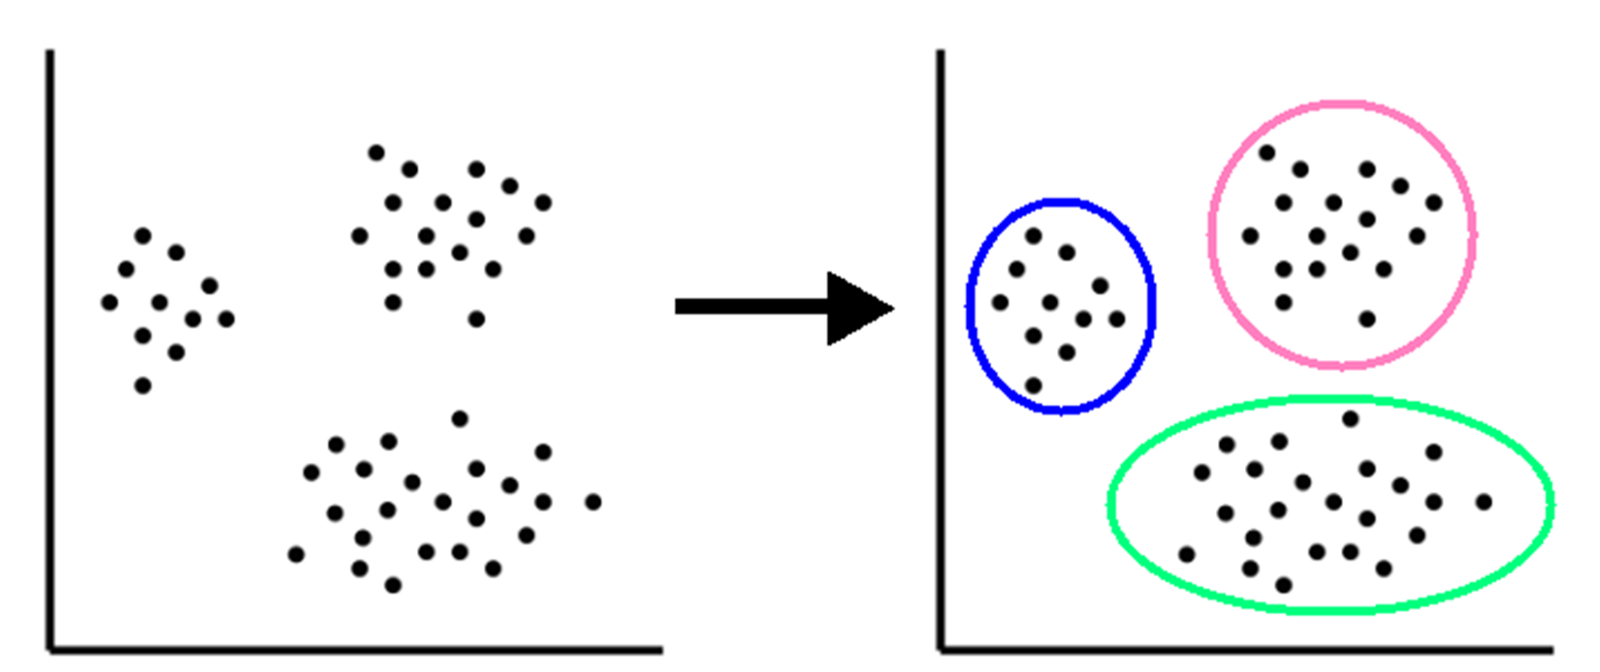 This is how a clustering algorithm is able to cluster the similar groups together.